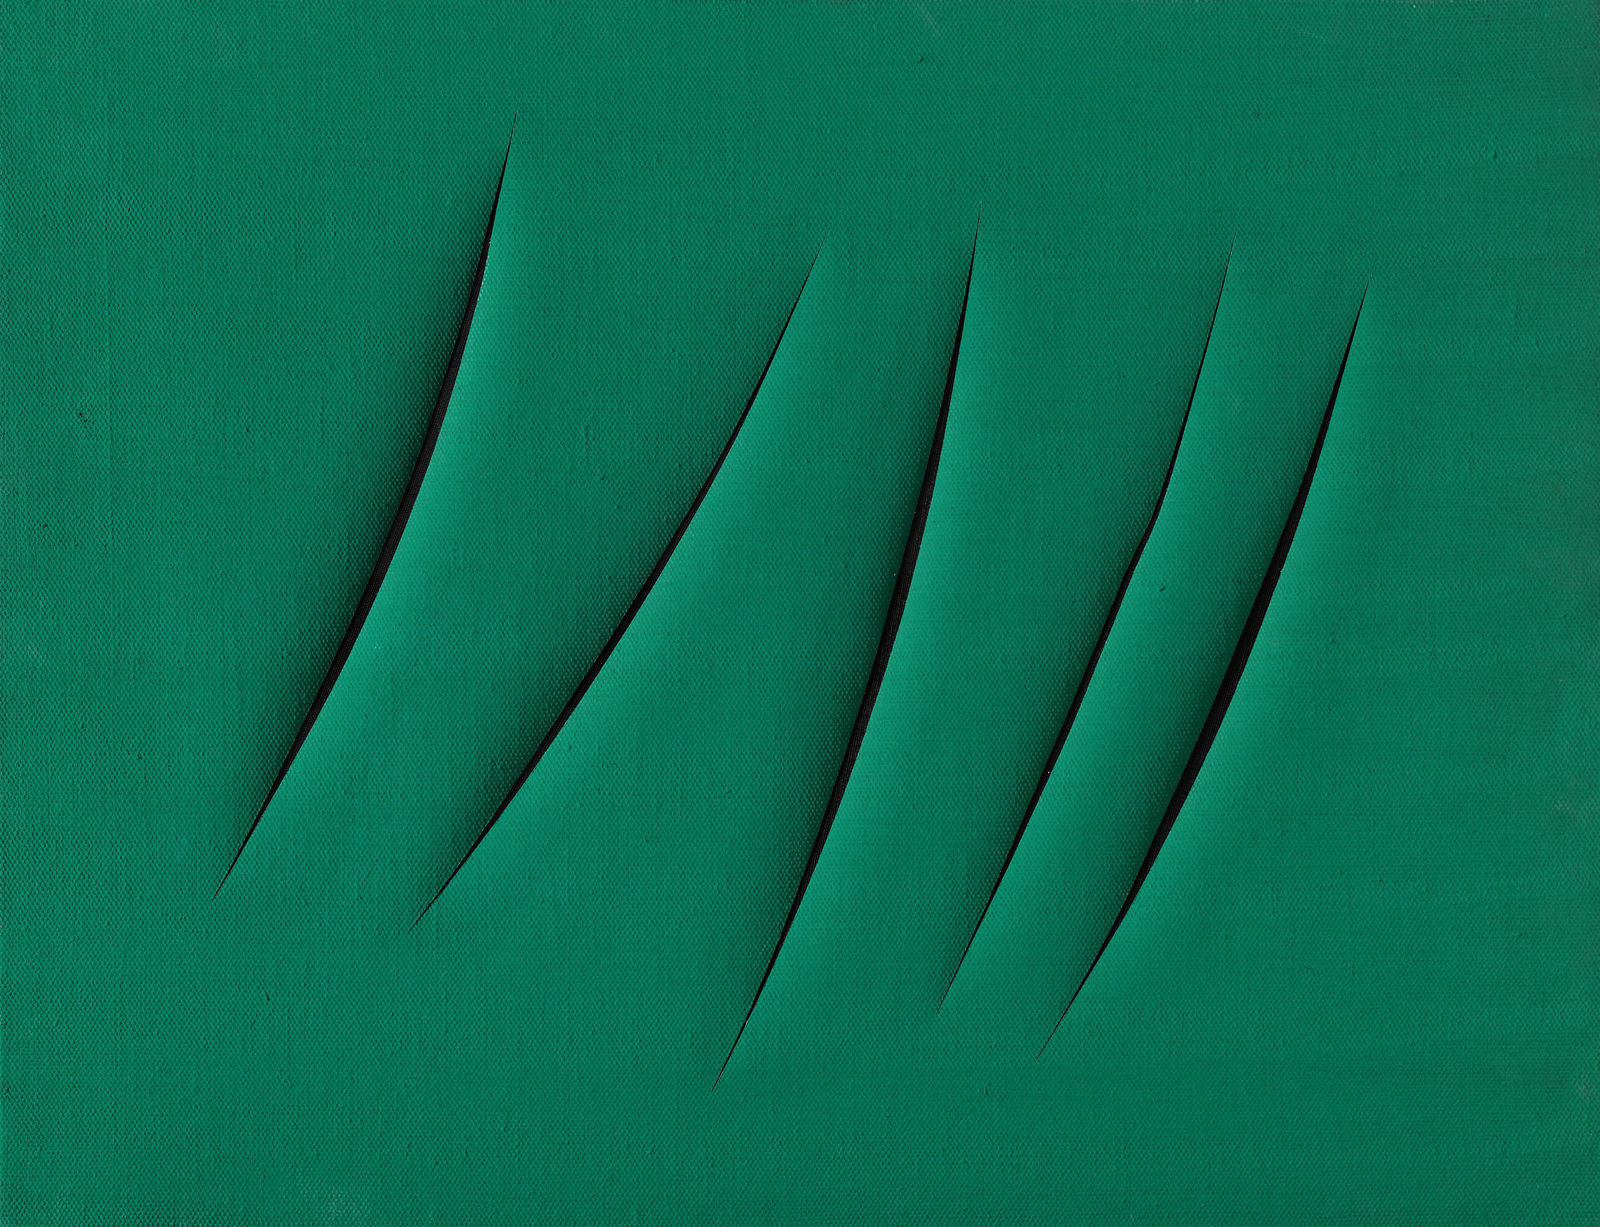 Lucio Fontana. Concetto spaziale, Attese. 1961. Water-based paint on canvas. 130 x 97 cm